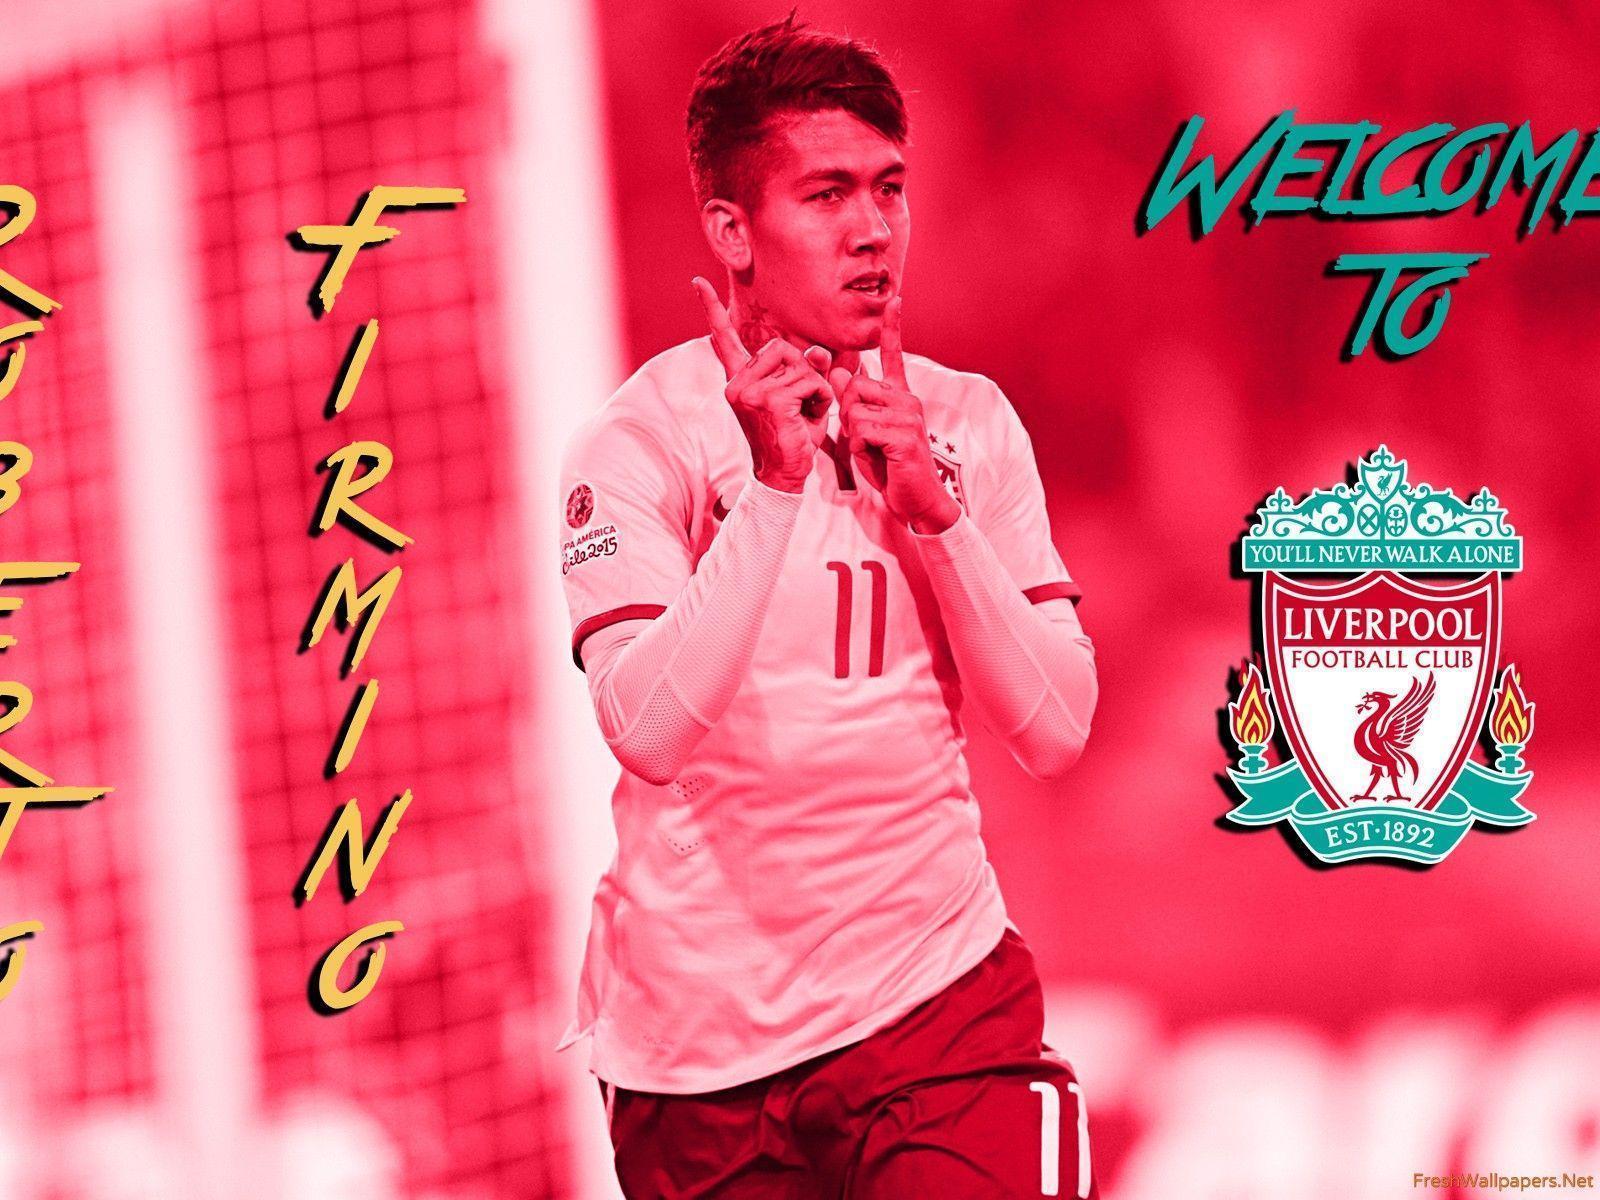 Roberto Firmino 2015 Welcome To Liverpool FC wallpaper